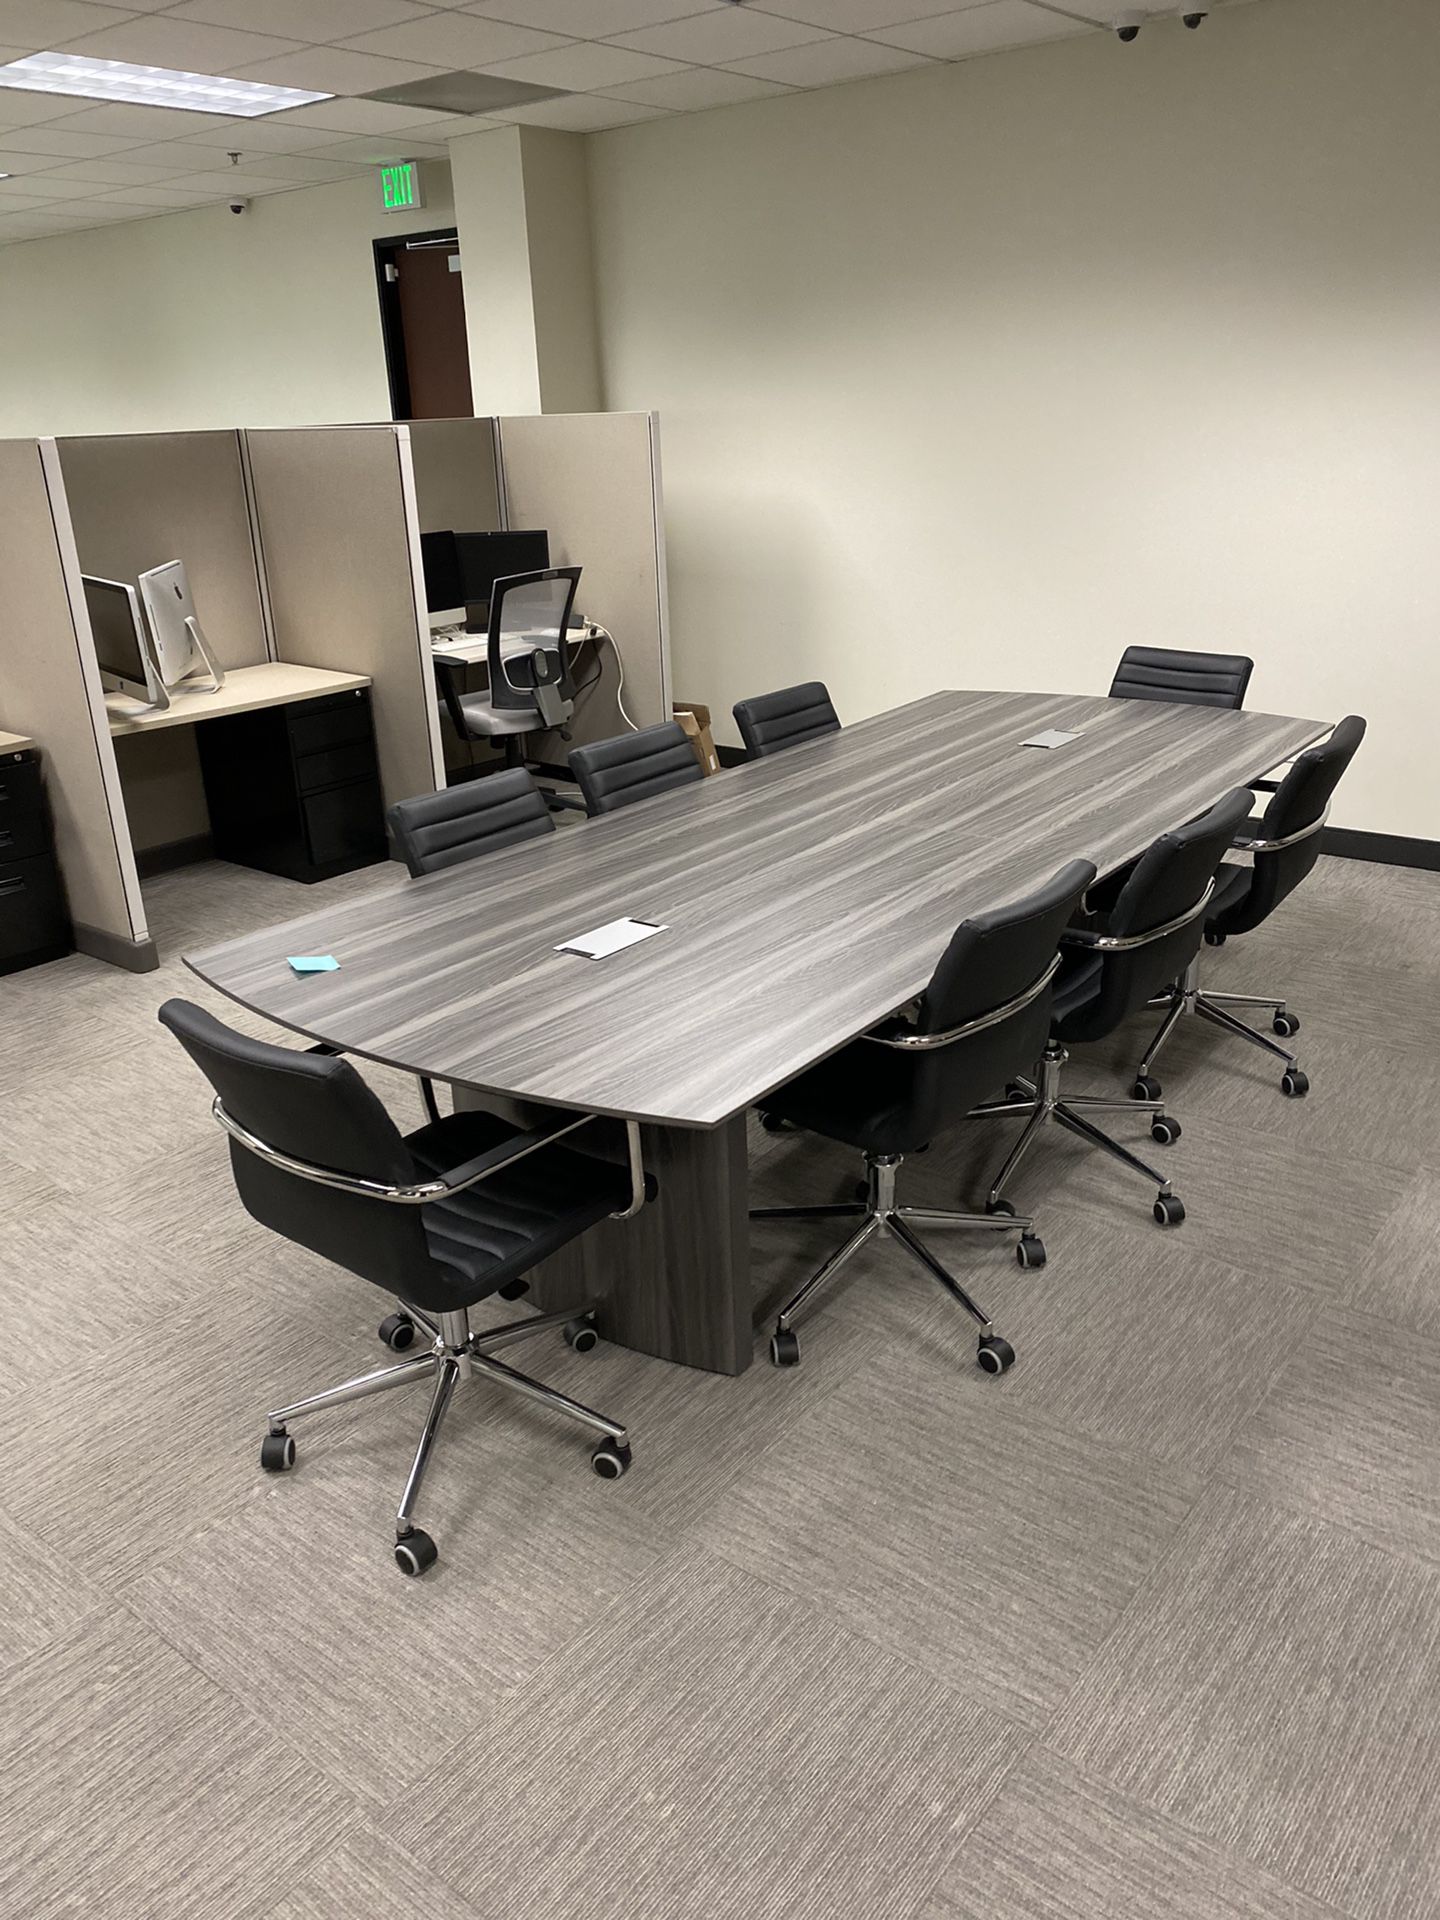 Office Conference table with chairs